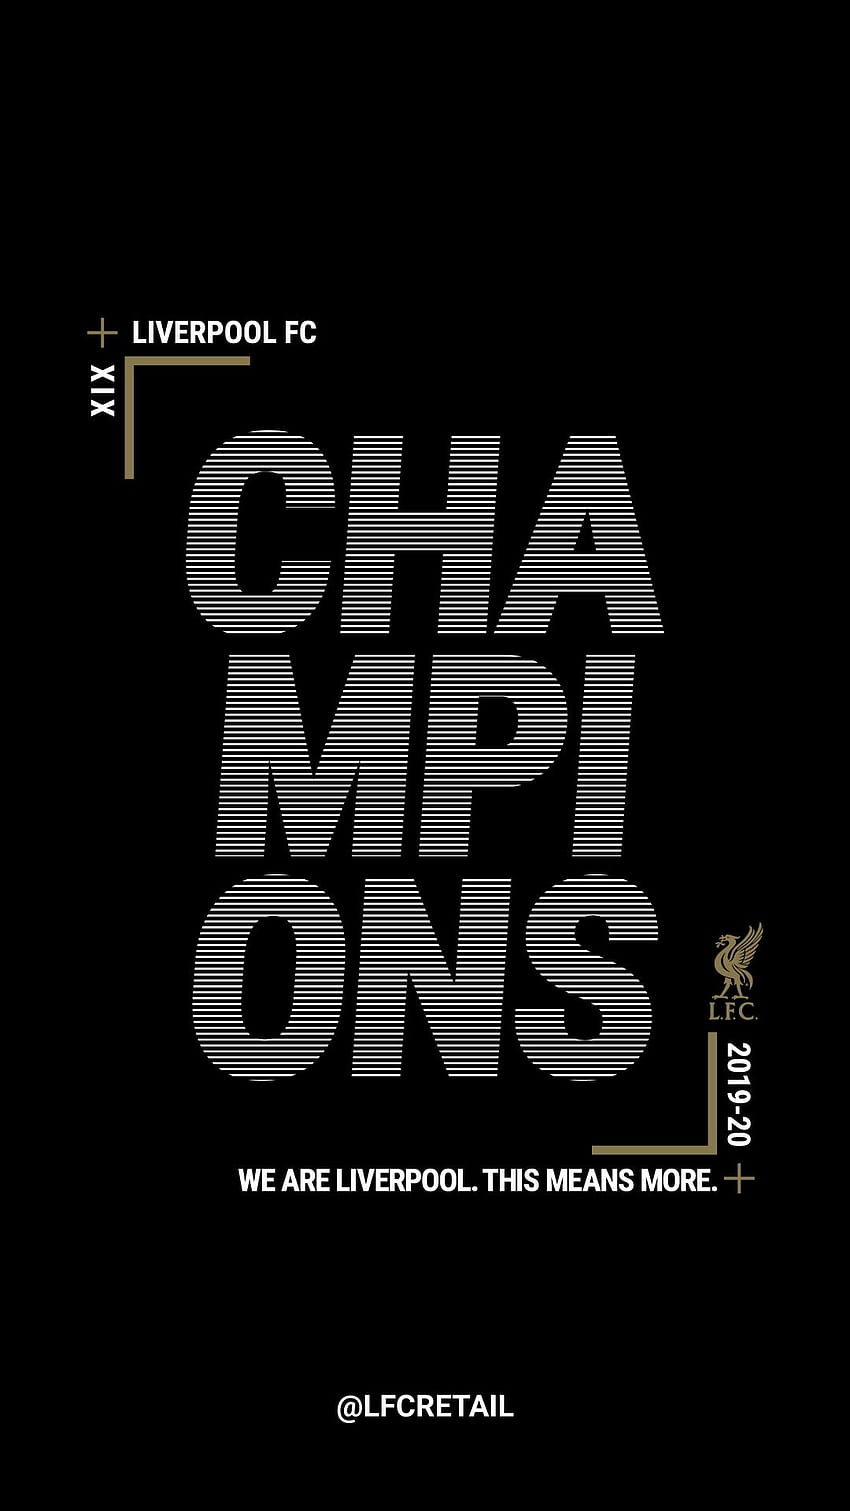 Liverpool FC Retail - Another HD phone wallpaper